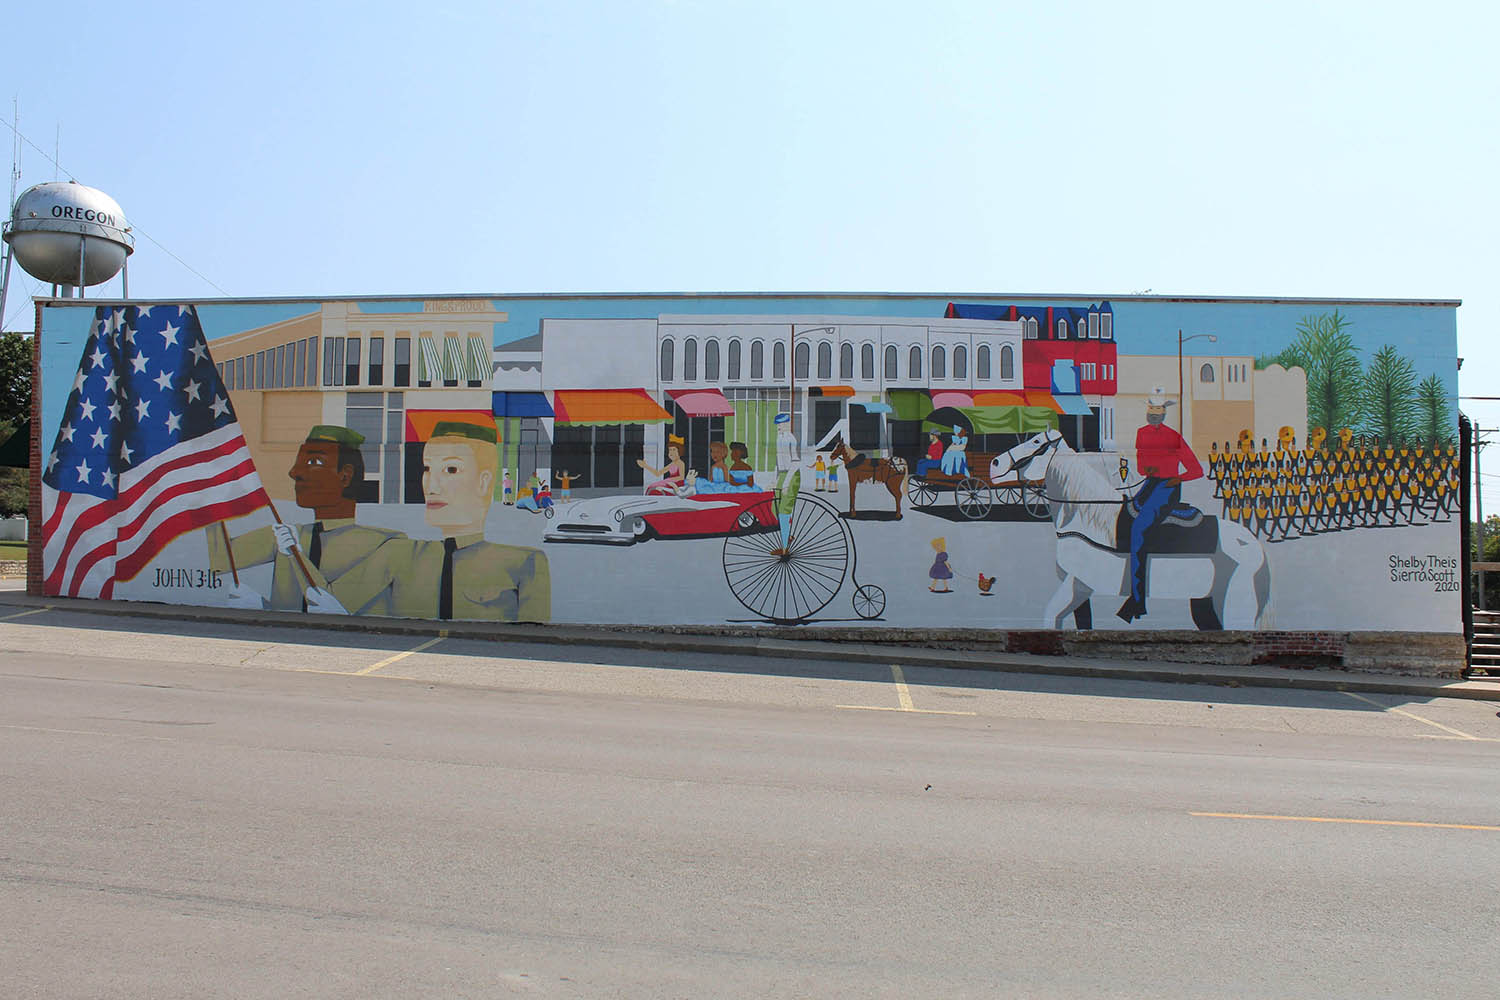 ... and completed the 76-foot wide, 16-foot tall mural in September.